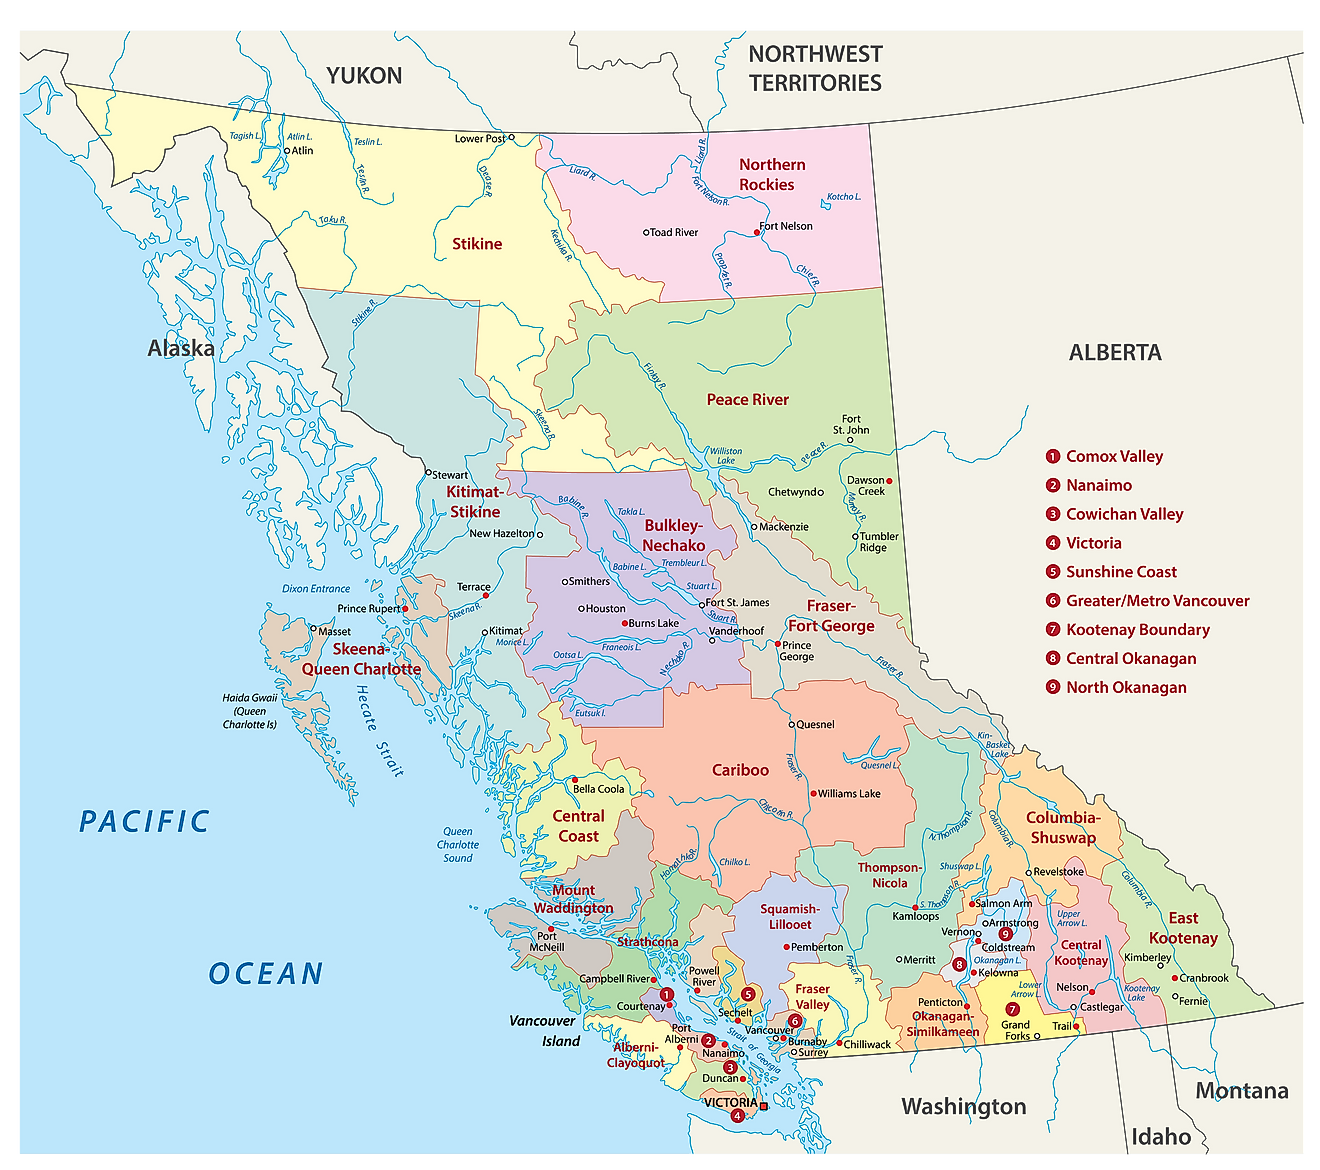 Administrative Map of British Columbia showing its various regional districts and its capital city - Victoria